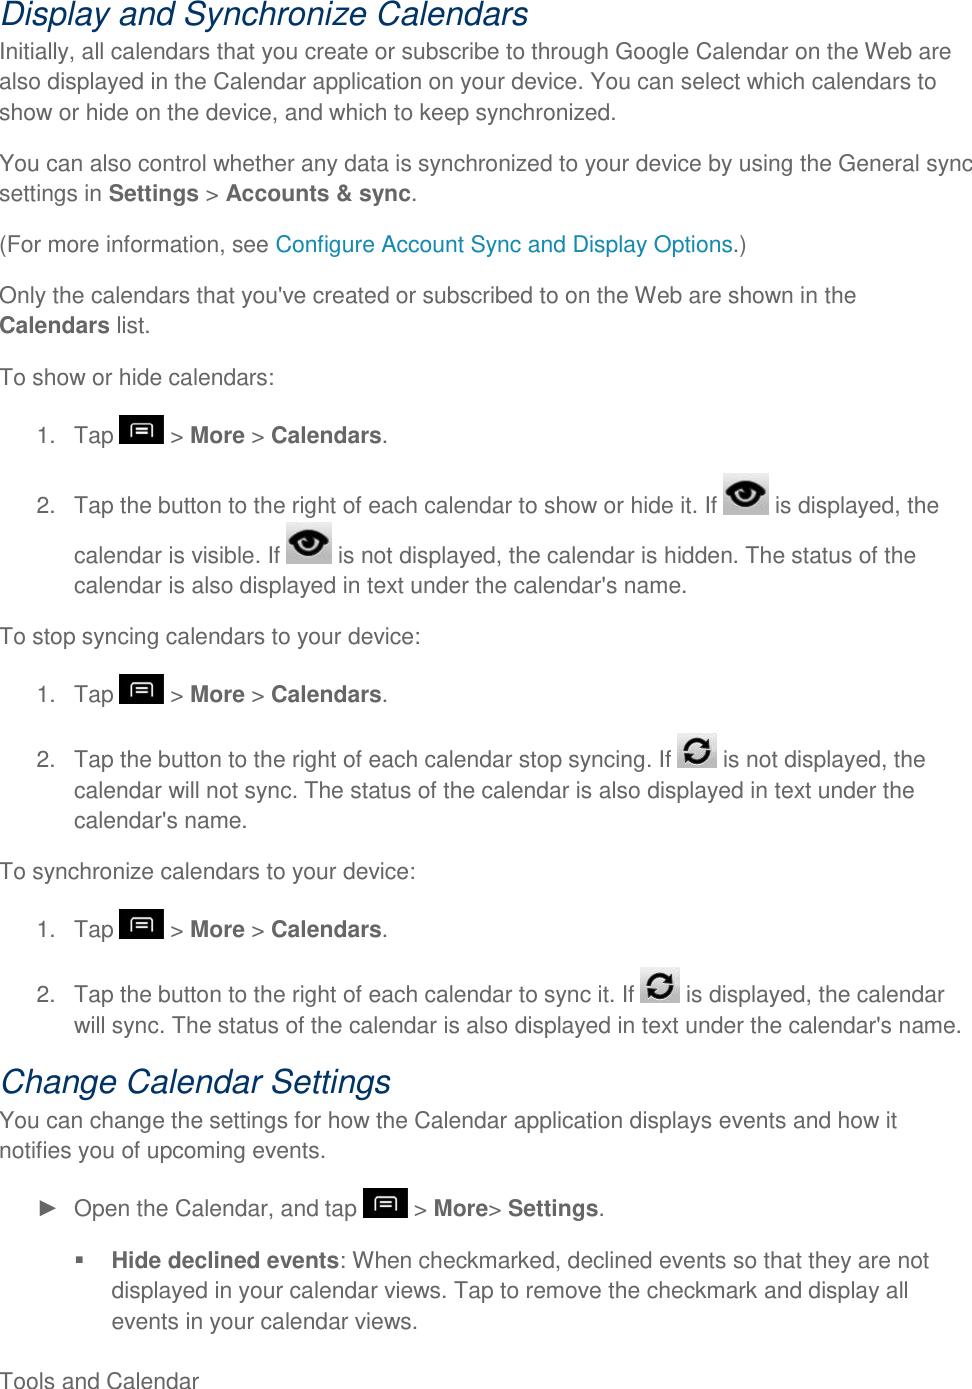  Tools and Calendar     Display and Synchronize Calendars Initially, all calendars that you create or subscribe to through Google Calendar on the Web are also displayed in the Calendar application on your device. You can select which calendars to show or hide on the device, and which to keep synchronized. You can also control whether any data is synchronized to your device by using the General sync settings in Settings &gt; Accounts &amp; sync. (For more information, see Configure Account Sync and Display Options.) Only the calendars that you&apos;ve created or subscribed to on the Web are shown in the Calendars list. To show or hide calendars: 1.  Tap   &gt; More &gt; Calendars. 2.  Tap the button to the right of each calendar to show or hide it. If   is displayed, the calendar is visible. If   is not displayed, the calendar is hidden. The status of the calendar is also displayed in text under the calendar&apos;s name. To stop syncing calendars to your device: 1.  Tap   &gt; More &gt; Calendars. 2.  Tap the button to the right of each calendar stop syncing. If   is not displayed, the calendar will not sync. The status of the calendar is also displayed in text under the calendar&apos;s name. To synchronize calendars to your device: 1.  Tap   &gt; More &gt; Calendars. 2.  Tap the button to the right of each calendar to sync it. If   is displayed, the calendar will sync. The status of the calendar is also displayed in text under the calendar&apos;s name. Change Calendar Settings You can change the settings for how the Calendar application displays events and how it notifies you of upcoming events.   Open the Calendar, and tap   &gt; More&gt; Settings.  Hide declined events: When checkmarked, declined events so that they are not displayed in your calendar views. Tap to remove the checkmark and display all events in your calendar views. 